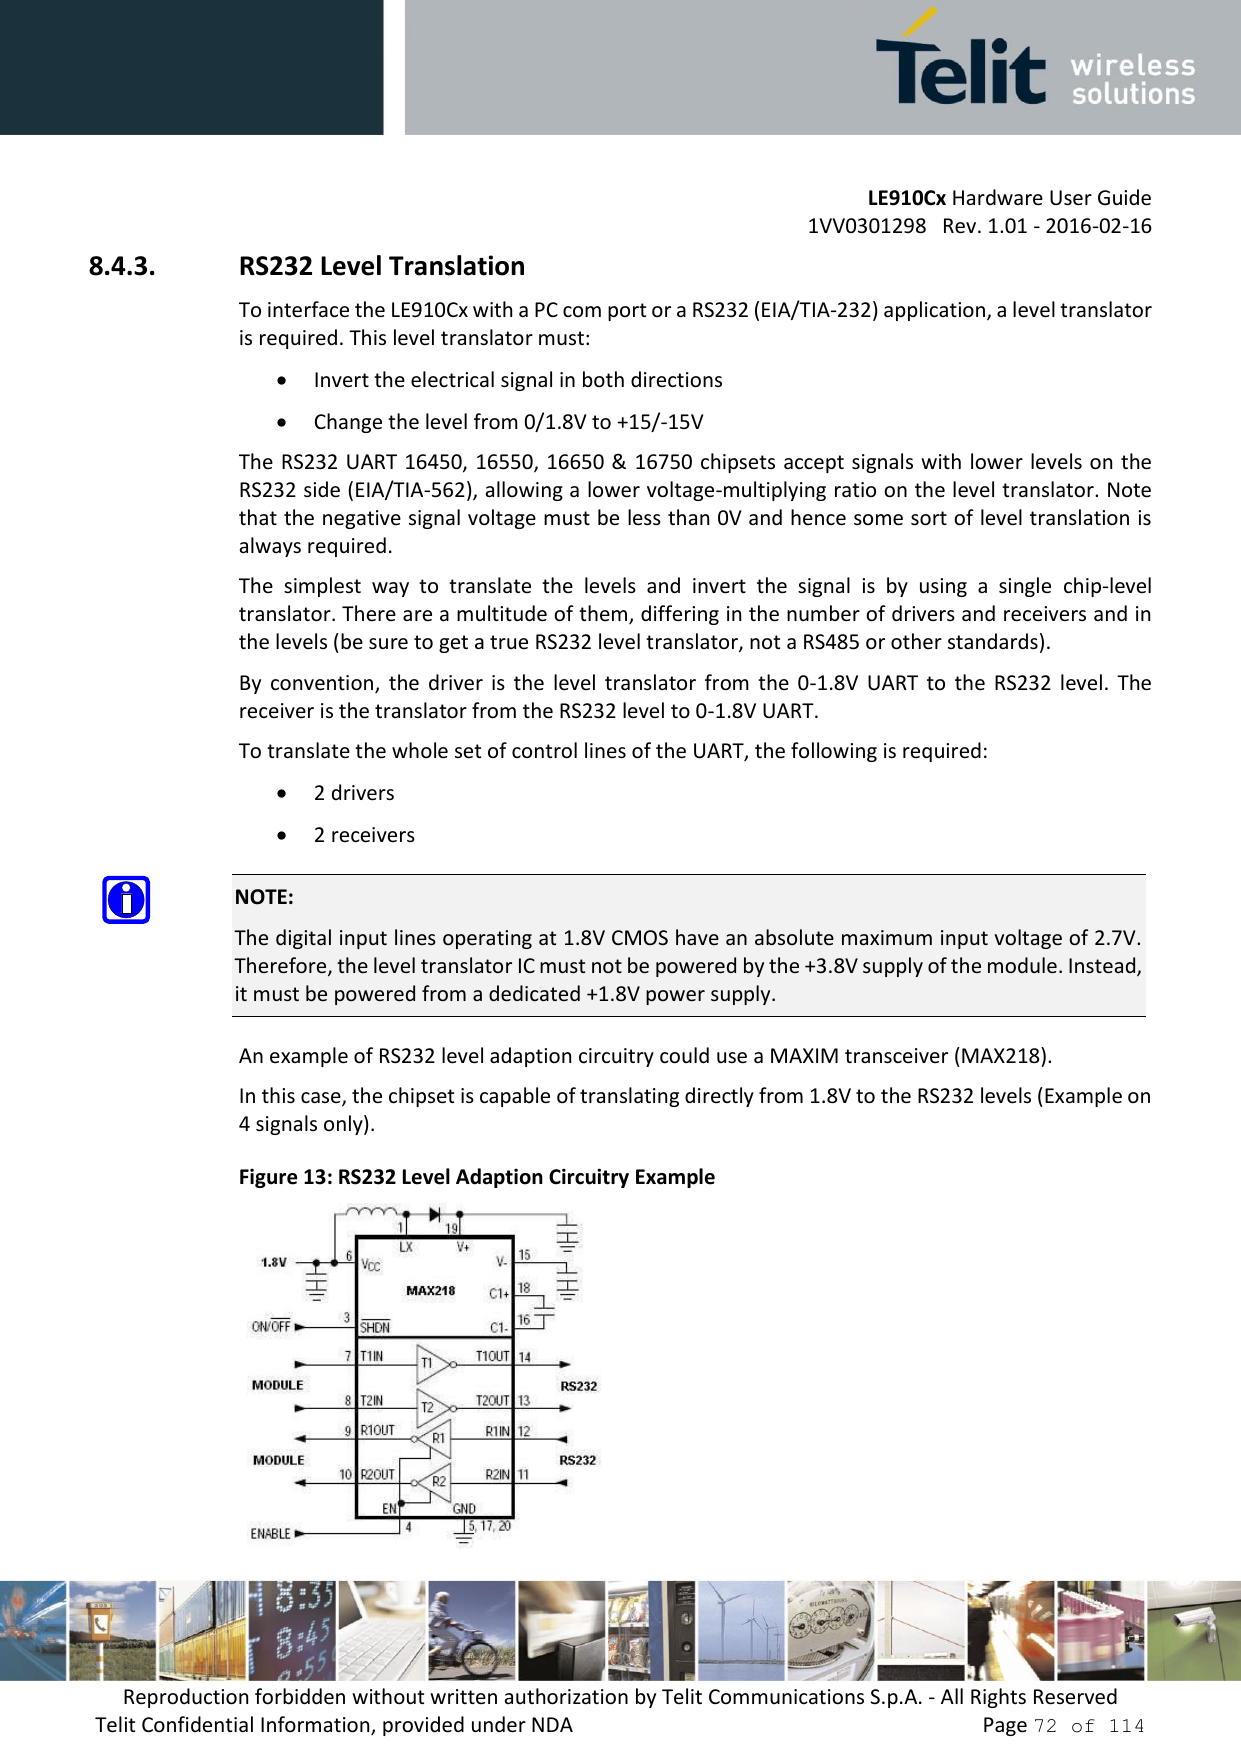         LE910Cx Hardware User Guide     1VV0301298   Rev. 1.01 - 2016-02-16 Reproduction forbidden without written authorization by Telit Communications S.p.A. - All Rights Reserved Telit Confidential Information, provided under NDA                 Page 72 of 114 8.4.3. RS232 Level Translation To interface the LE910Cx with a PC com port or a RS232 (EIA/TIA-232) application, a level translator is required. This level translator must:  Invert the electrical signal in both directions  Change the level from 0/1.8V to +15/-15V The RS232 UART 16450, 16550, 16650 &amp; 16750 chipsets accept signals with lower levels on the RS232 side (EIA/TIA-562), allowing a lower voltage-multiplying ratio on the level translator. Note that the negative signal voltage must be less than 0V and hence some sort of level translation is always required.  The  simplest  way  to  translate  the  levels  and  invert  the  signal  is  by  using  a  single  chip-level translator. There are a multitude of them, differing in the number of drivers and receivers and in the levels (be sure to get a true RS232 level translator, not a RS485 or other standards). By  convention,  the  driver  is  the  level  translator  from  the  0-1.8V  UART  to  the  RS232  level.  The receiver is the translator from the RS232 level to 0-1.8V UART. To translate the whole set of control lines of the UART, the following is required:  2 drivers  2 receivers  NOTE: The digital input lines operating at 1.8V CMOS have an absolute maximum input voltage of 2.7V. Therefore, the level translator IC must not be powered by the +3.8V supply of the module. Instead, it must be powered from a dedicated +1.8V power supply.  An example of RS232 level adaption circuitry could use a MAXIM transceiver (MAX218).  In this case, the chipset is capable of translating directly from 1.8V to the RS232 levels (Example on 4 signals only). Figure 13: RS232 Level Adaption Circuitry Example  